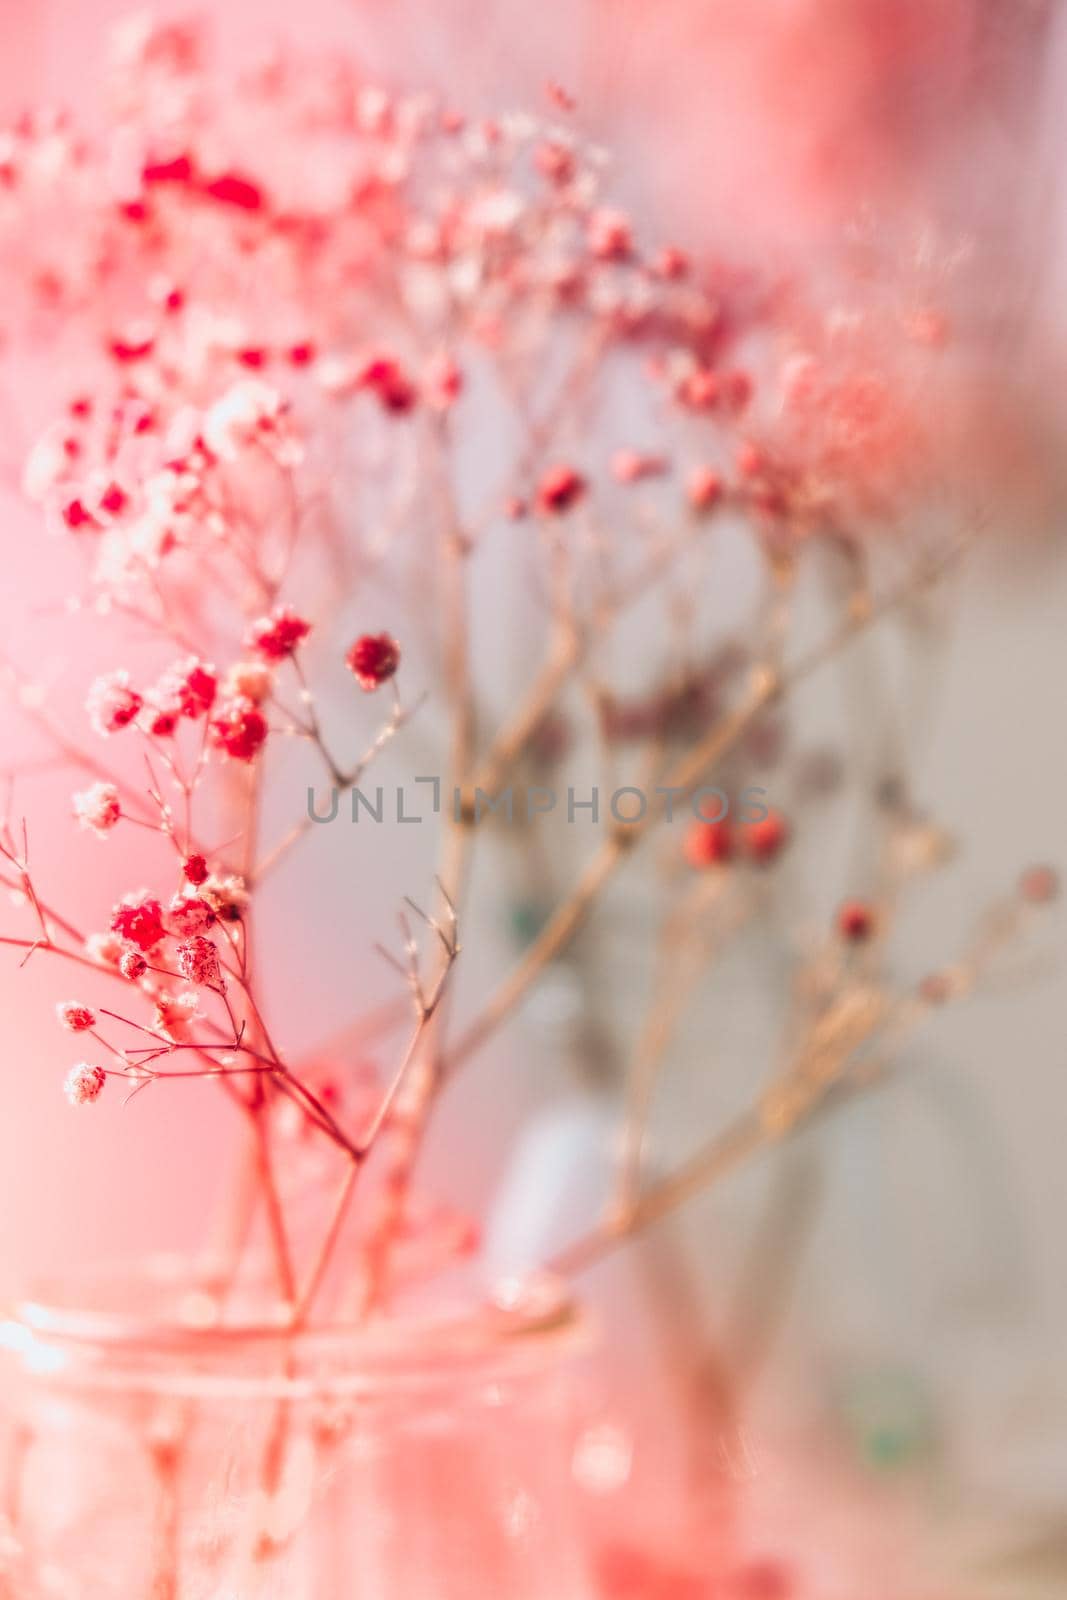 Gypsophila or baby's breath flowers Beautiful pink flower blooming with soft light. Selective focus. Spring holiday card background. Delicate aesthetics. Bloom nature backdrop.